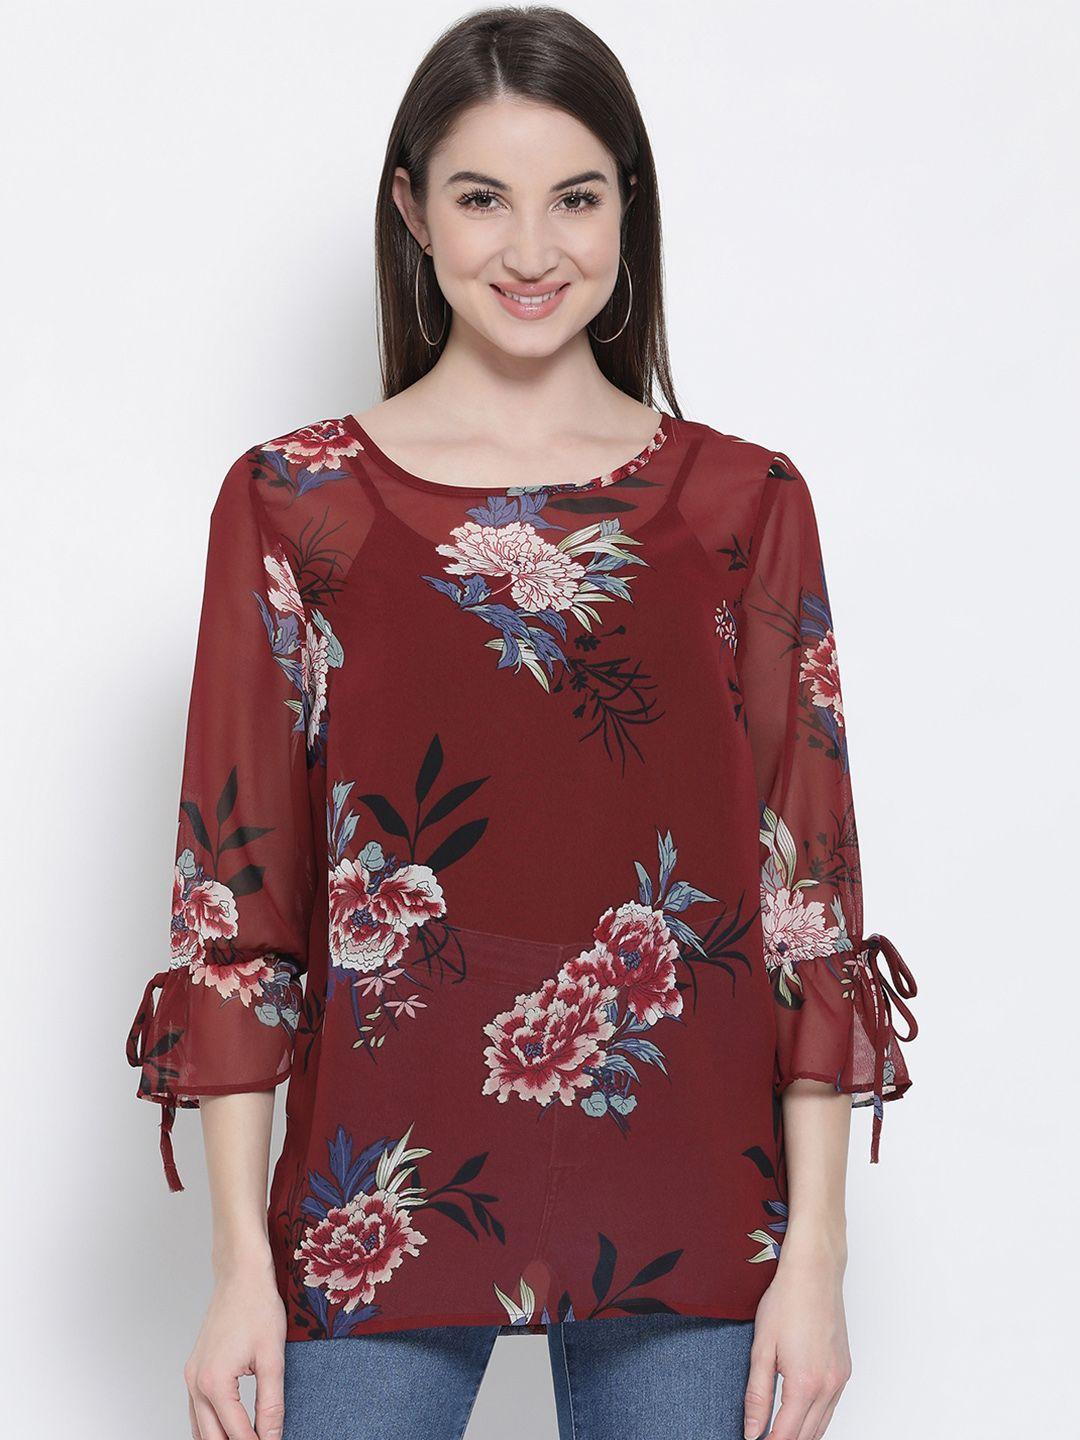 oxolloxo women maroon floral print top